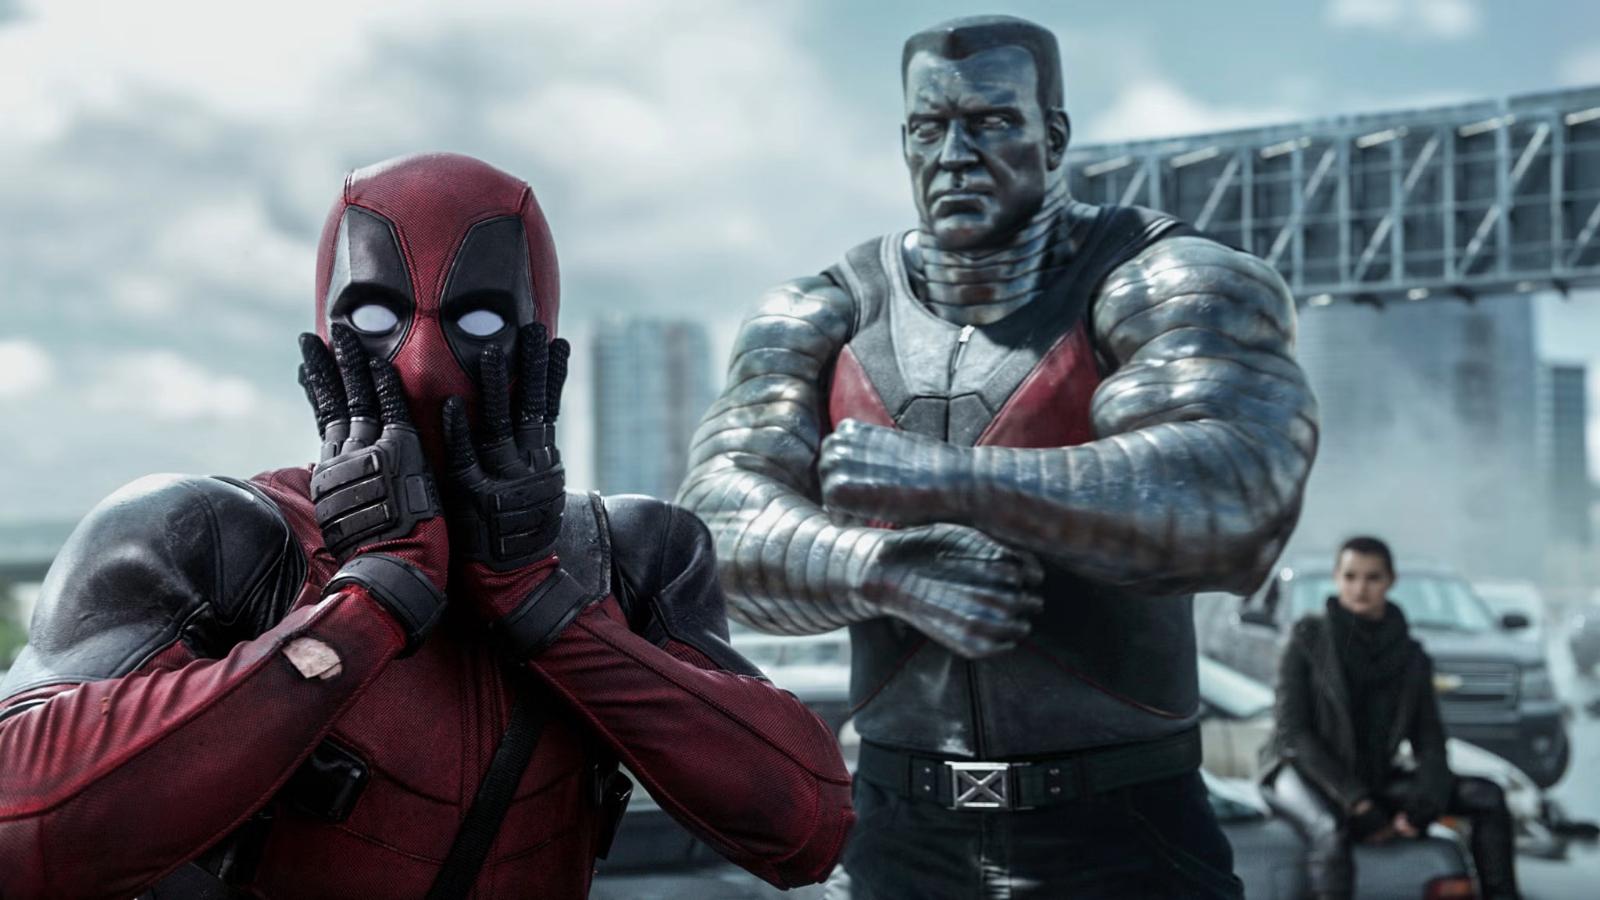 Deadpool and Colossus standing on a bridge in the Deadpool movie, with Deadpool's hands over his face